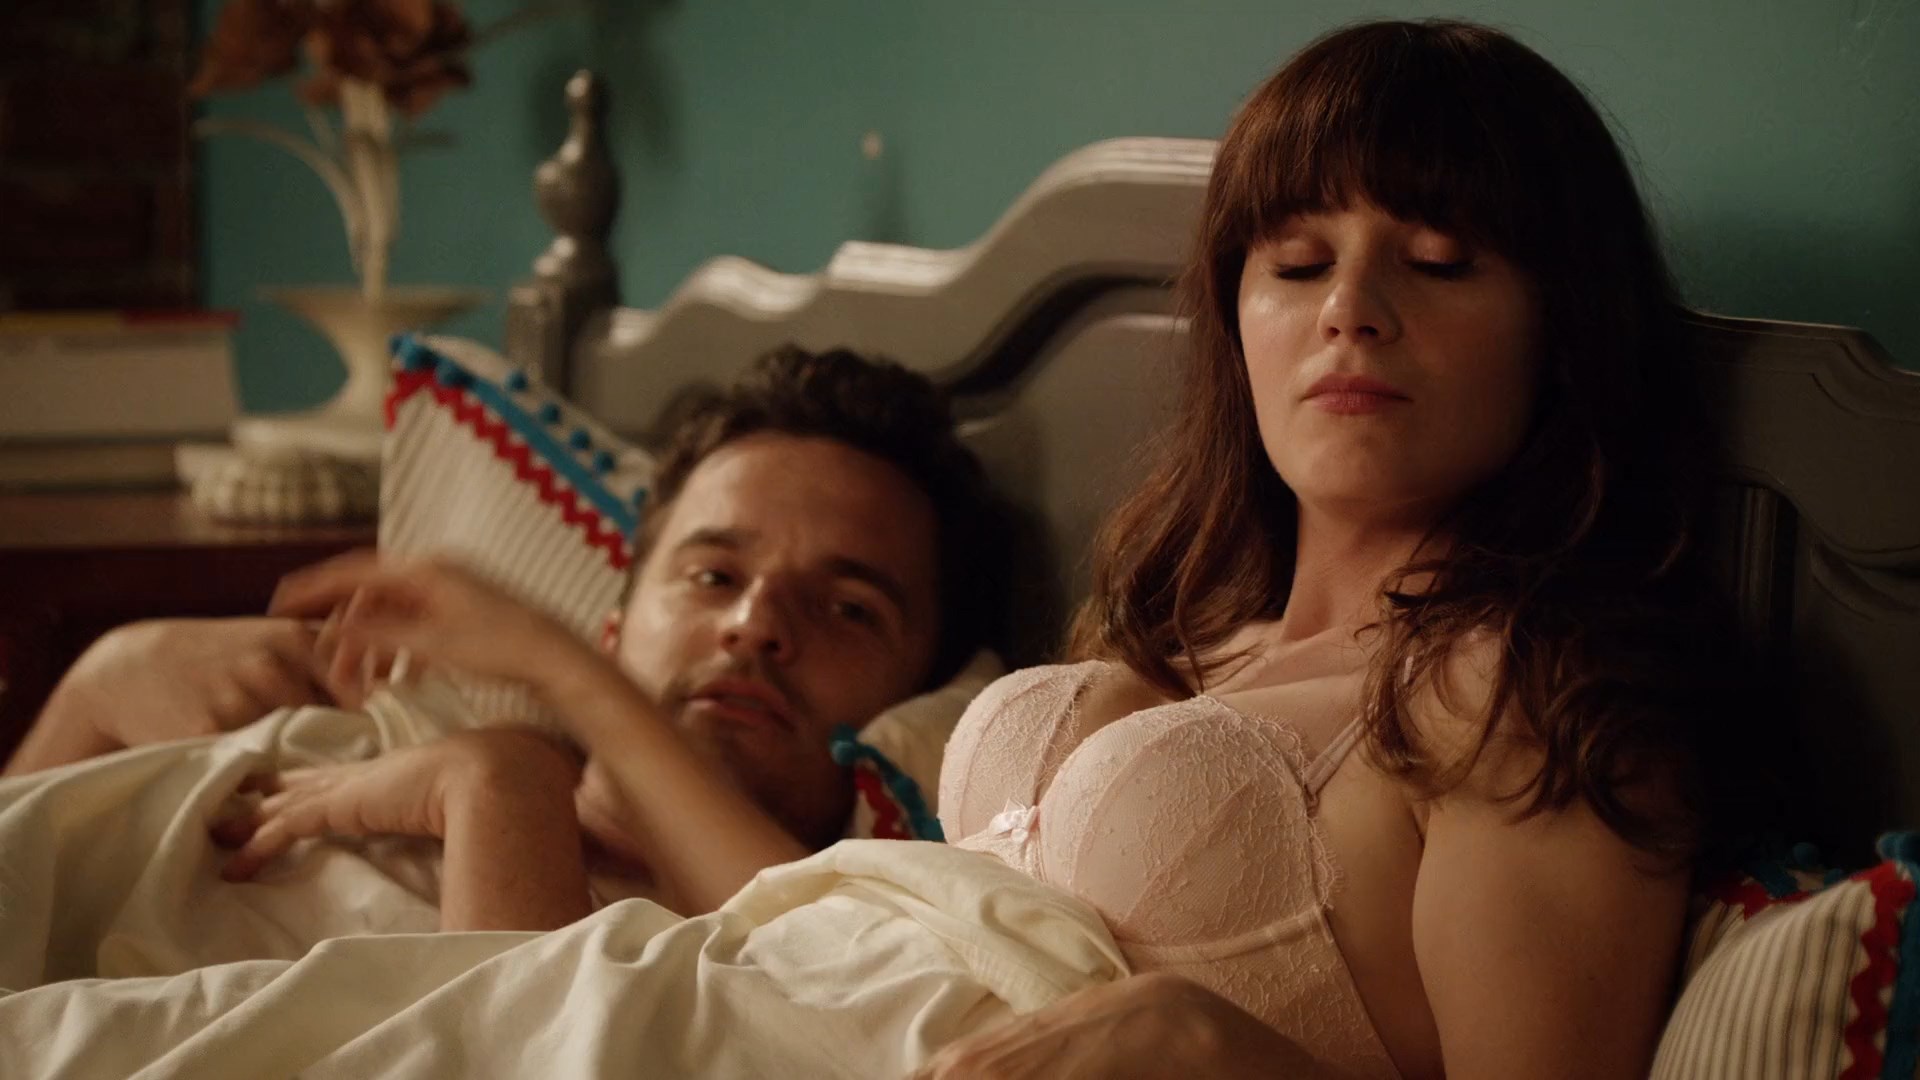 Zooey deschanel let's have a threesome